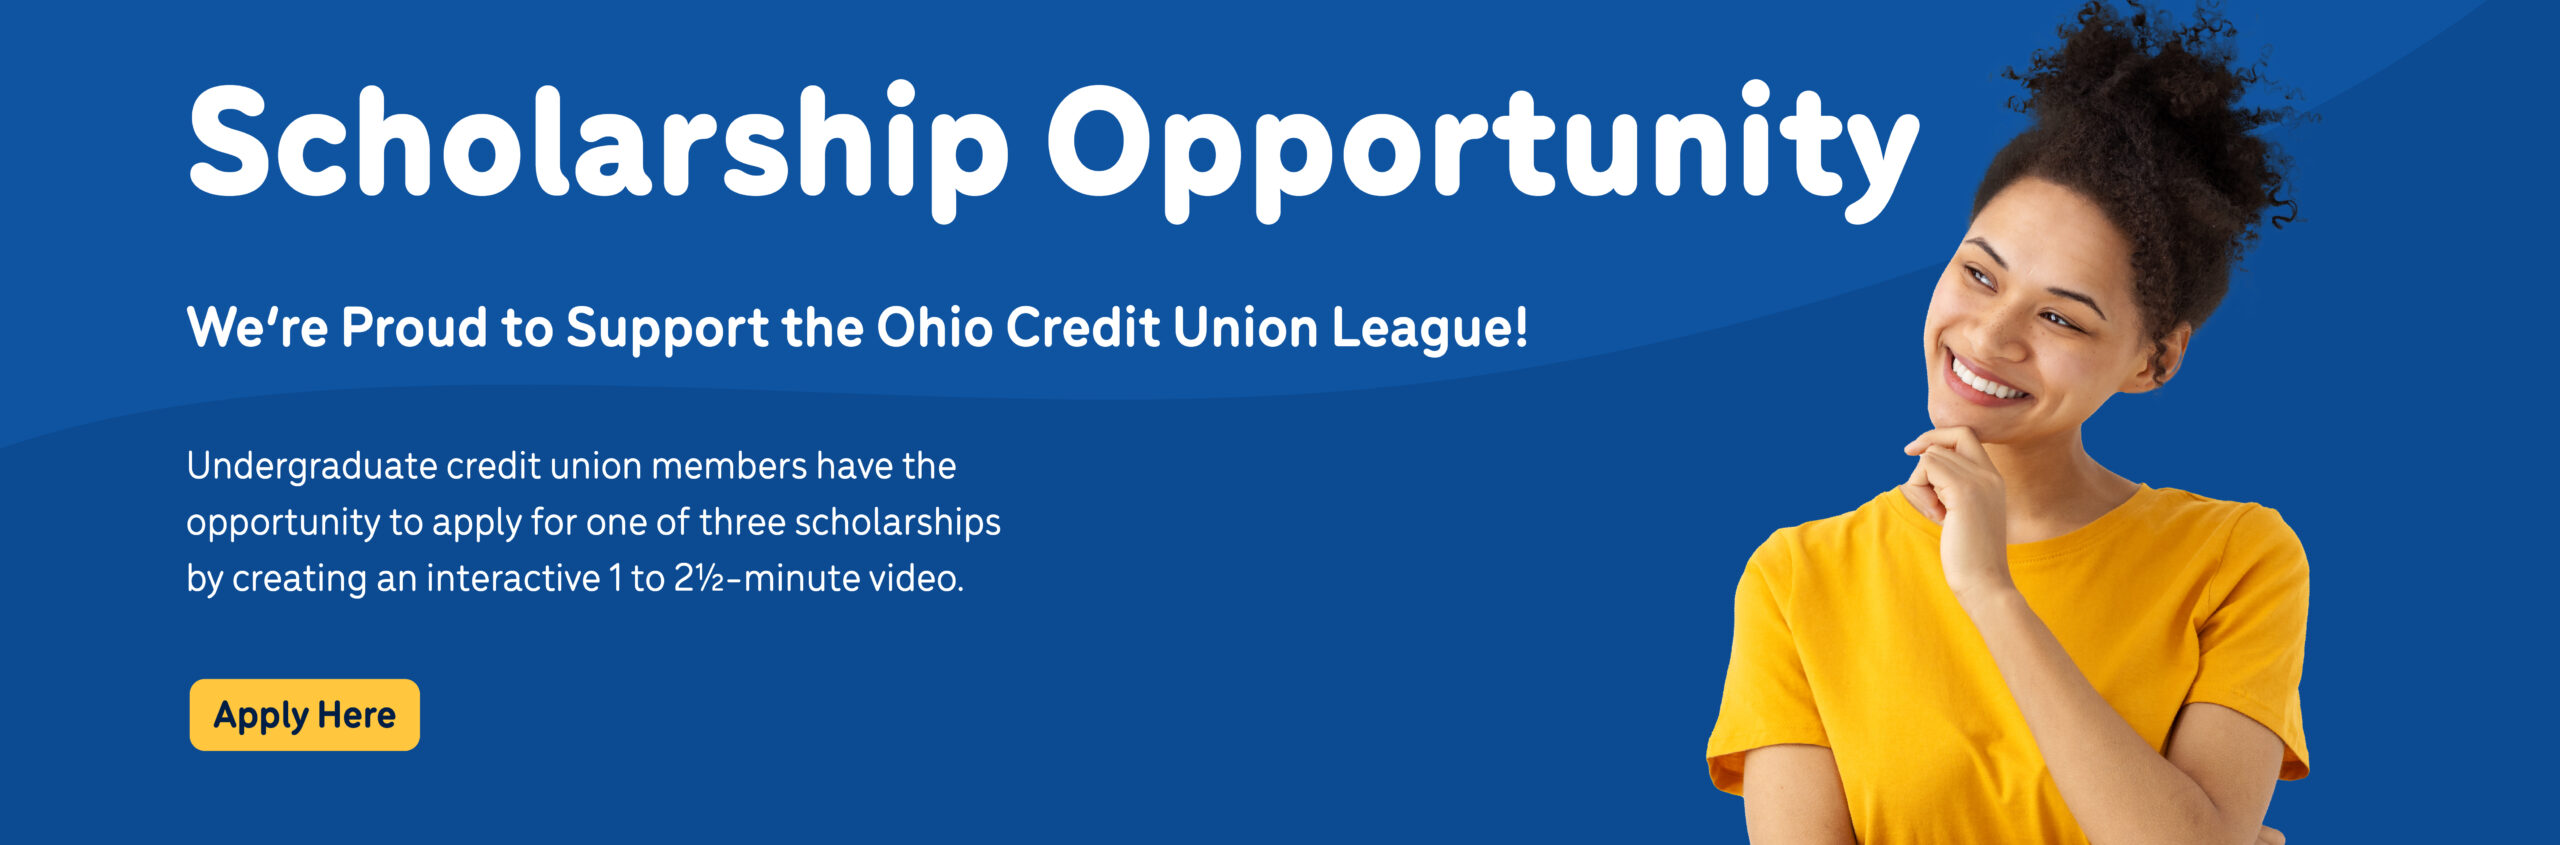 Undergraduate credit union members have the opportunity to apply for one of three scholarships by creating an interactive 1 to 2½-minute video.